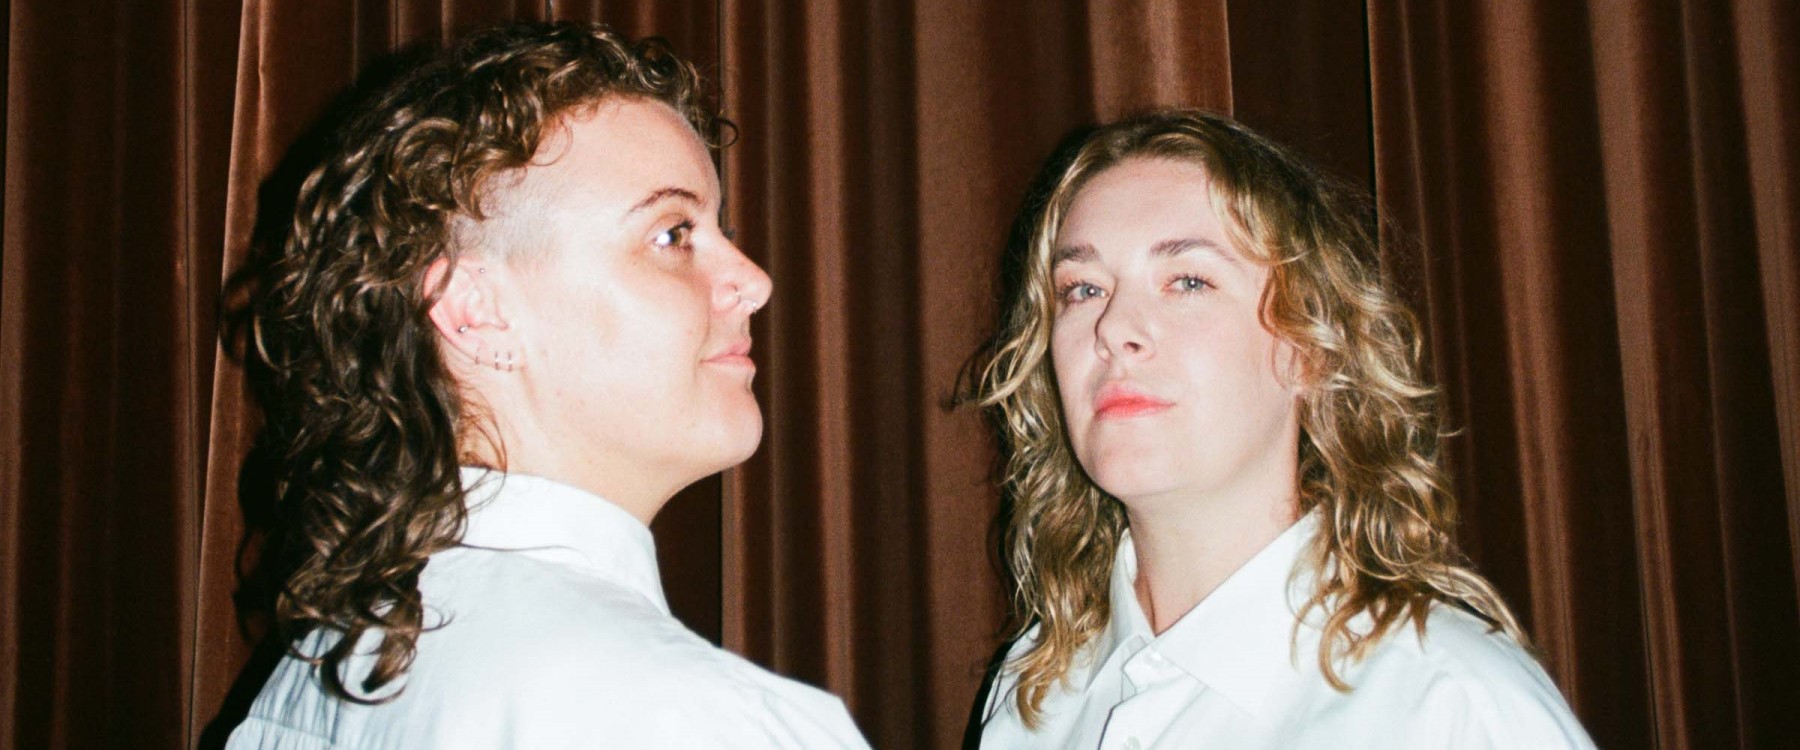 A close shot of two performers, both wearing white collared shirts against a brown velvet curtain backdrop. The left performer has brown wavy hair and various piercings, looks off to the right. The right performer looks at the viewer with blonde wavy hair.